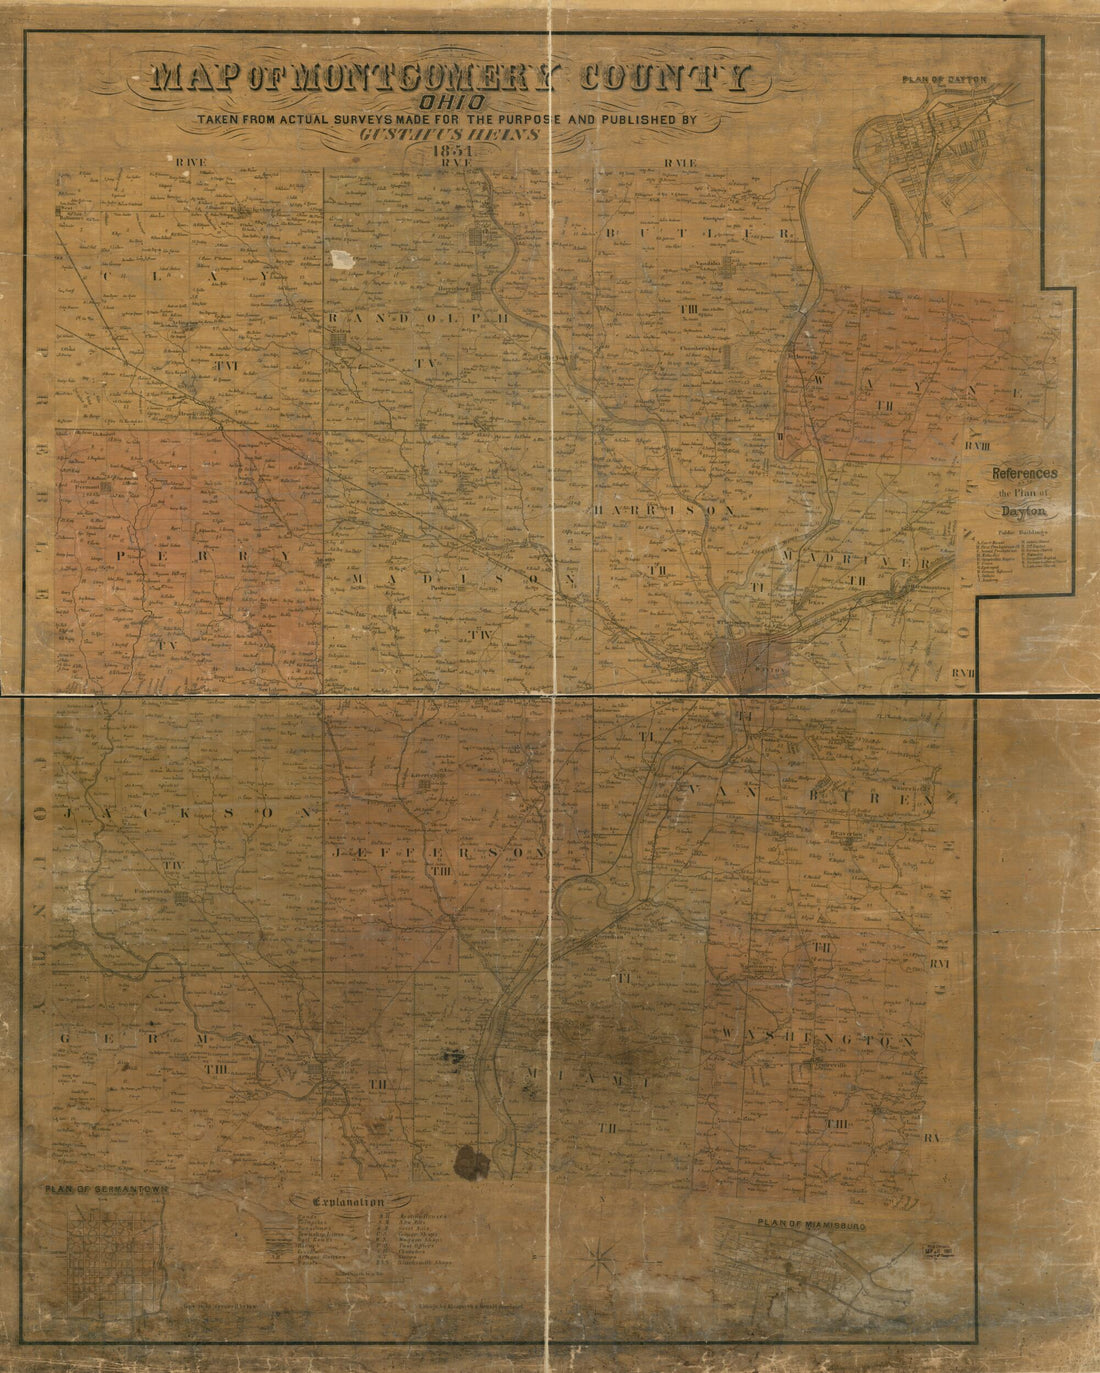 This old map of Map of Montgomery County, Ohio from 1851 was created by Gustavus Heins,  Klauprech &amp; Menzel in 1851